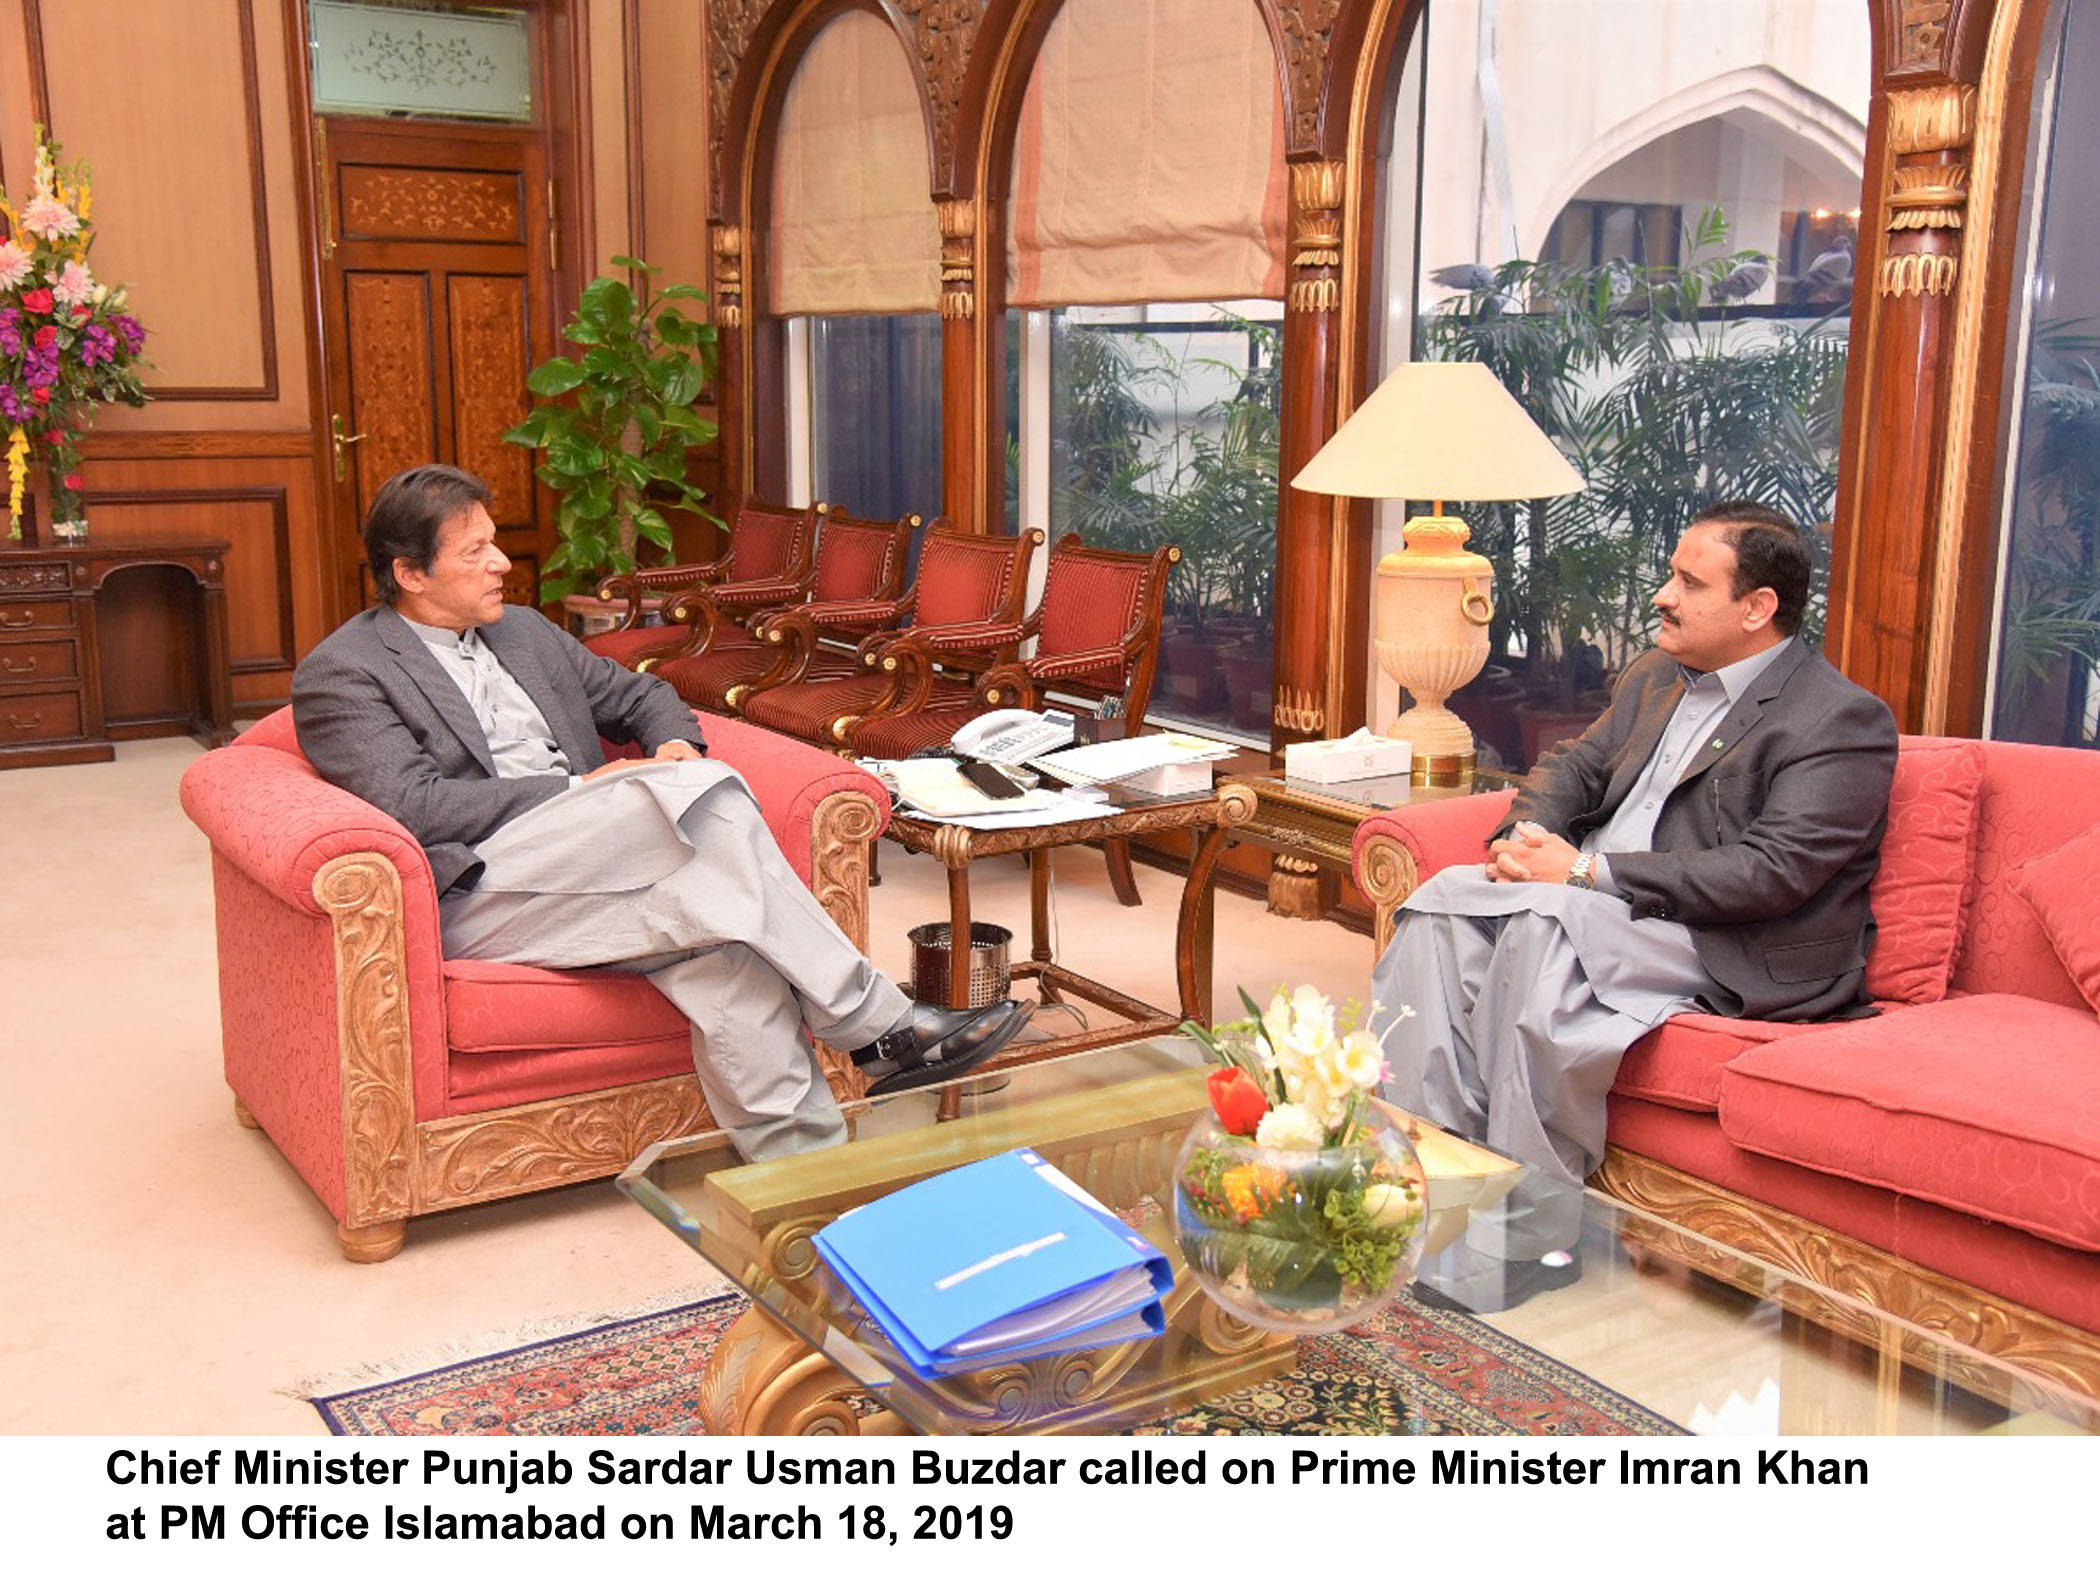 chief minister punjab sardar usman buzdar calls on prime minister imran khan at the pm office islamabad on march 18 2019 photo pid